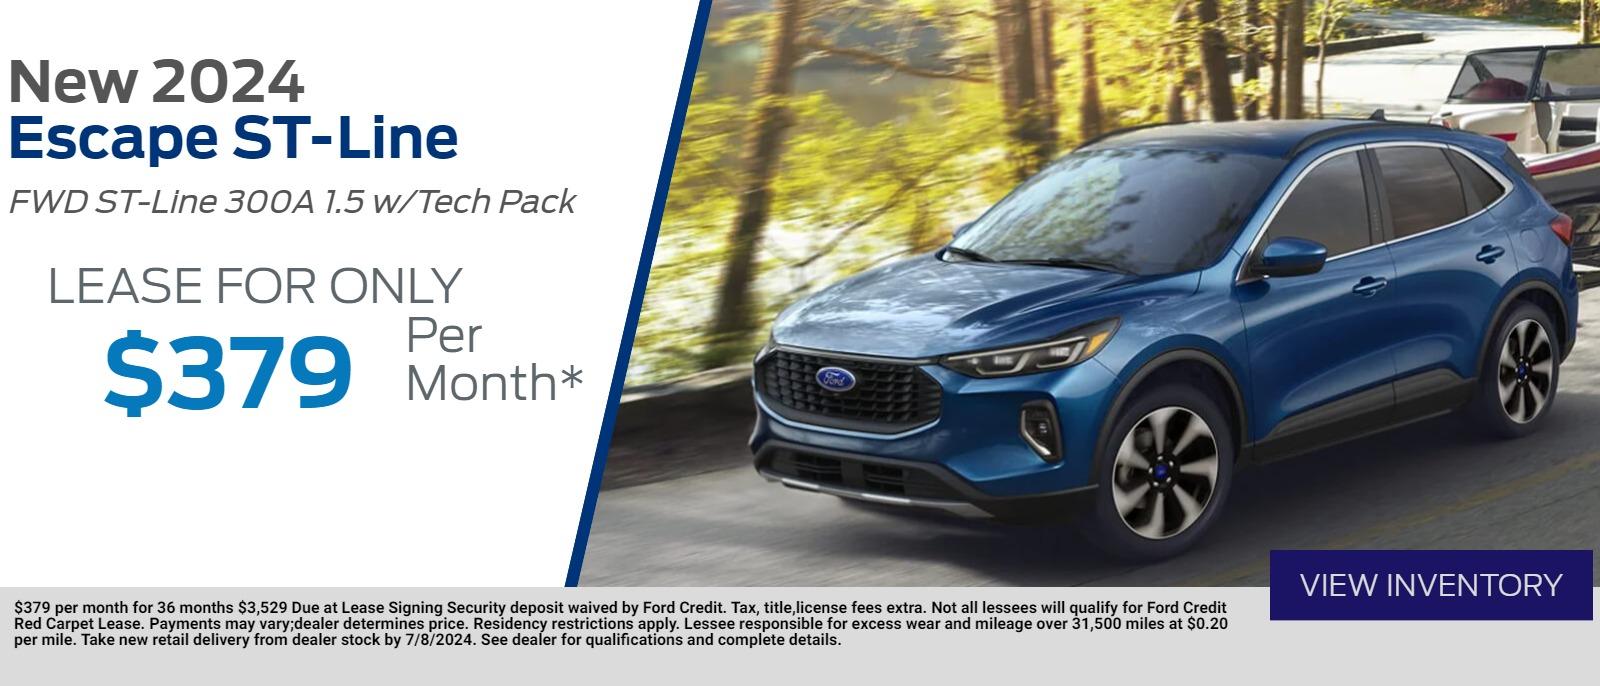 New 2024 
Escape ST-Line           
FWD ST-Line 300A 1.5 W/Tech Pack
Lease for Only

 $ 379   Per Month*
$379 per month for 36 months $3,529 Due at Lease Signing Security deposit waived by Ford Credit. Tax, title,license fees extra. Not all lessees will qualify for Ford Credit Red Carpet Lease. Payments may vary;dealer determines price. Residency restrictions apply. Lessee responsible for excess wear and mileage over 31,500 miles at $0.20 per mile. Take new retail delivery from dealer stock by 7/8/2024. See dealer for qualifications and complete details.